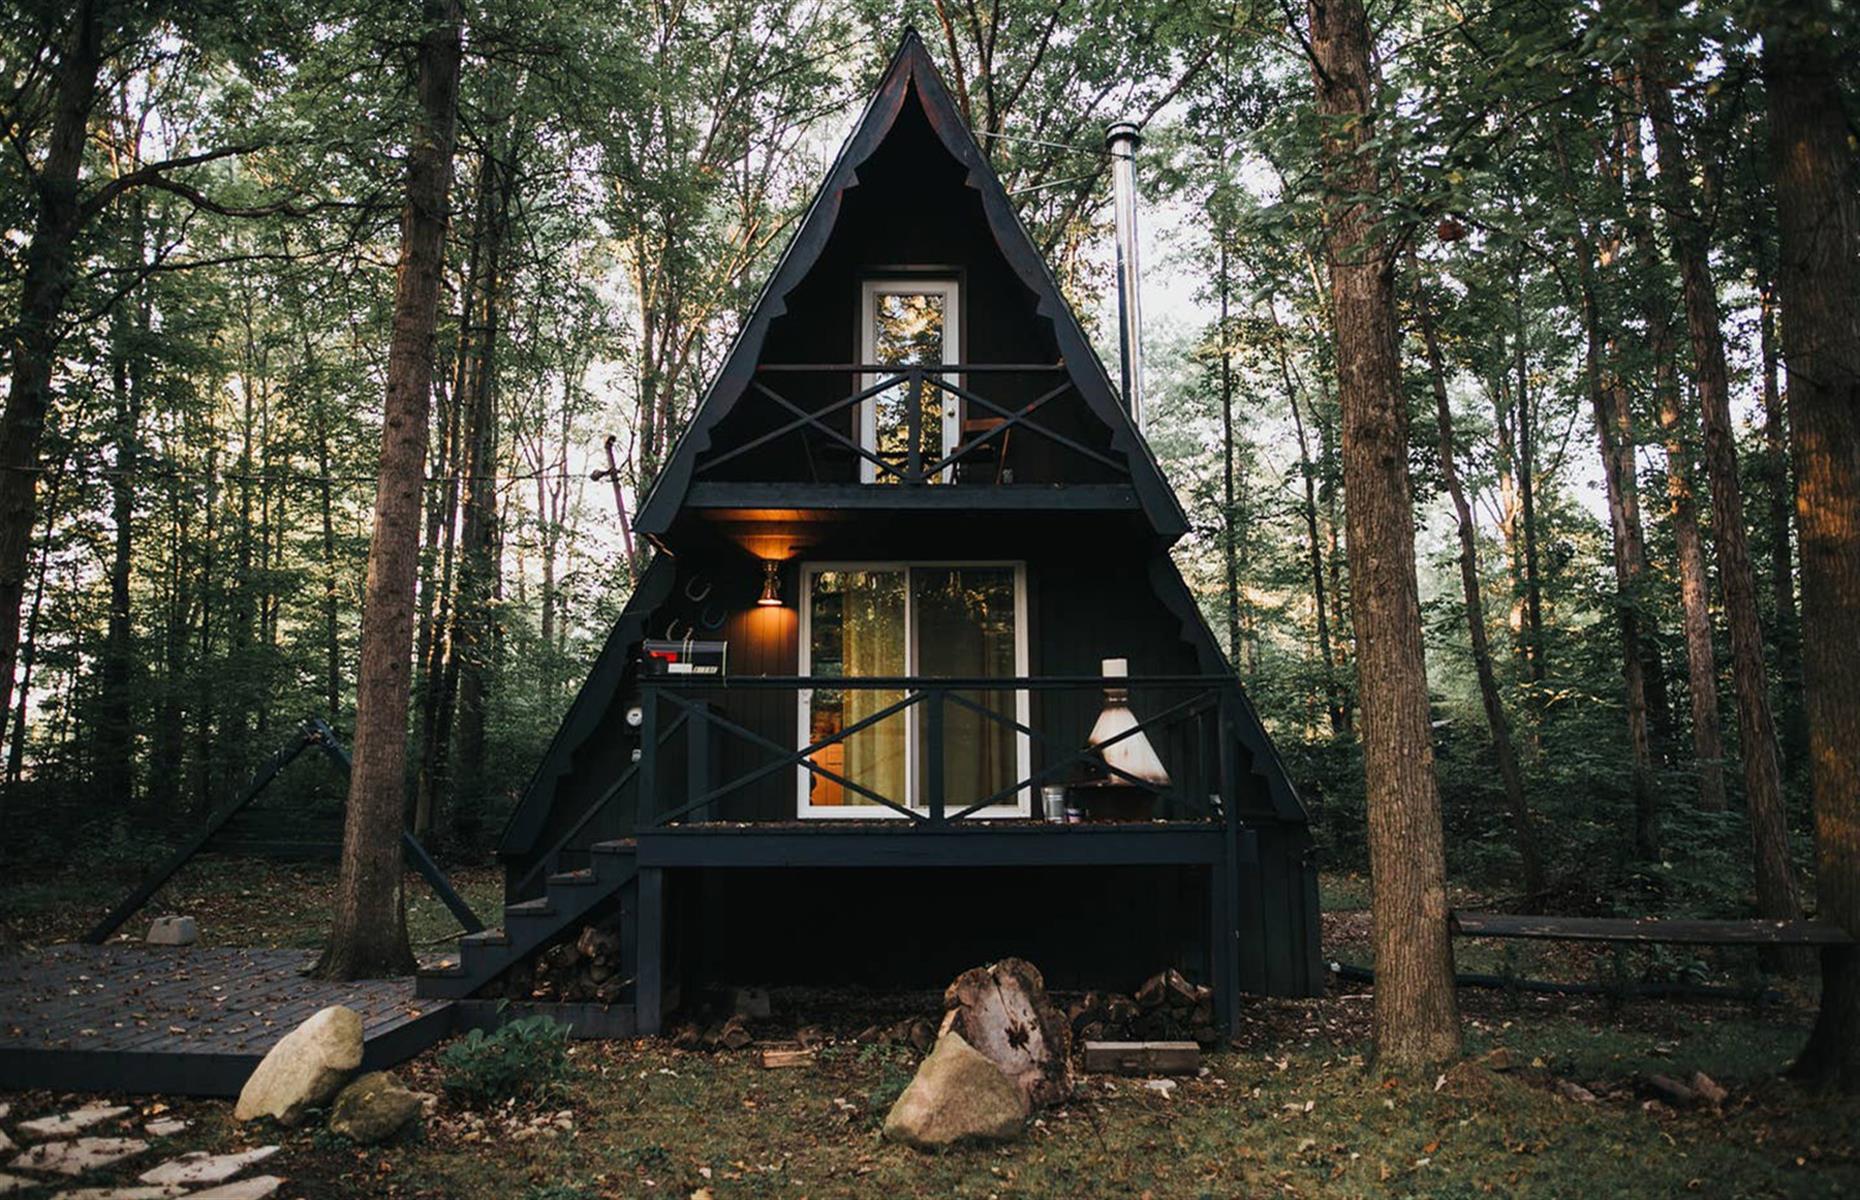 <p>Guests can go full <em>Hansel and Gretel</em> (without the witch) in this unique <a href="http://www.airbnb.co.uk/rooms/22995081">A-frame cabin in the Ohio woods</a>. There's a wood-burning stove, exposed beams throughout and small terraces on both levels. The quaint village of West Farmington is close by and has several local produce shops while the surrounding landscape is fantastic for relaxing nature walks.</p>